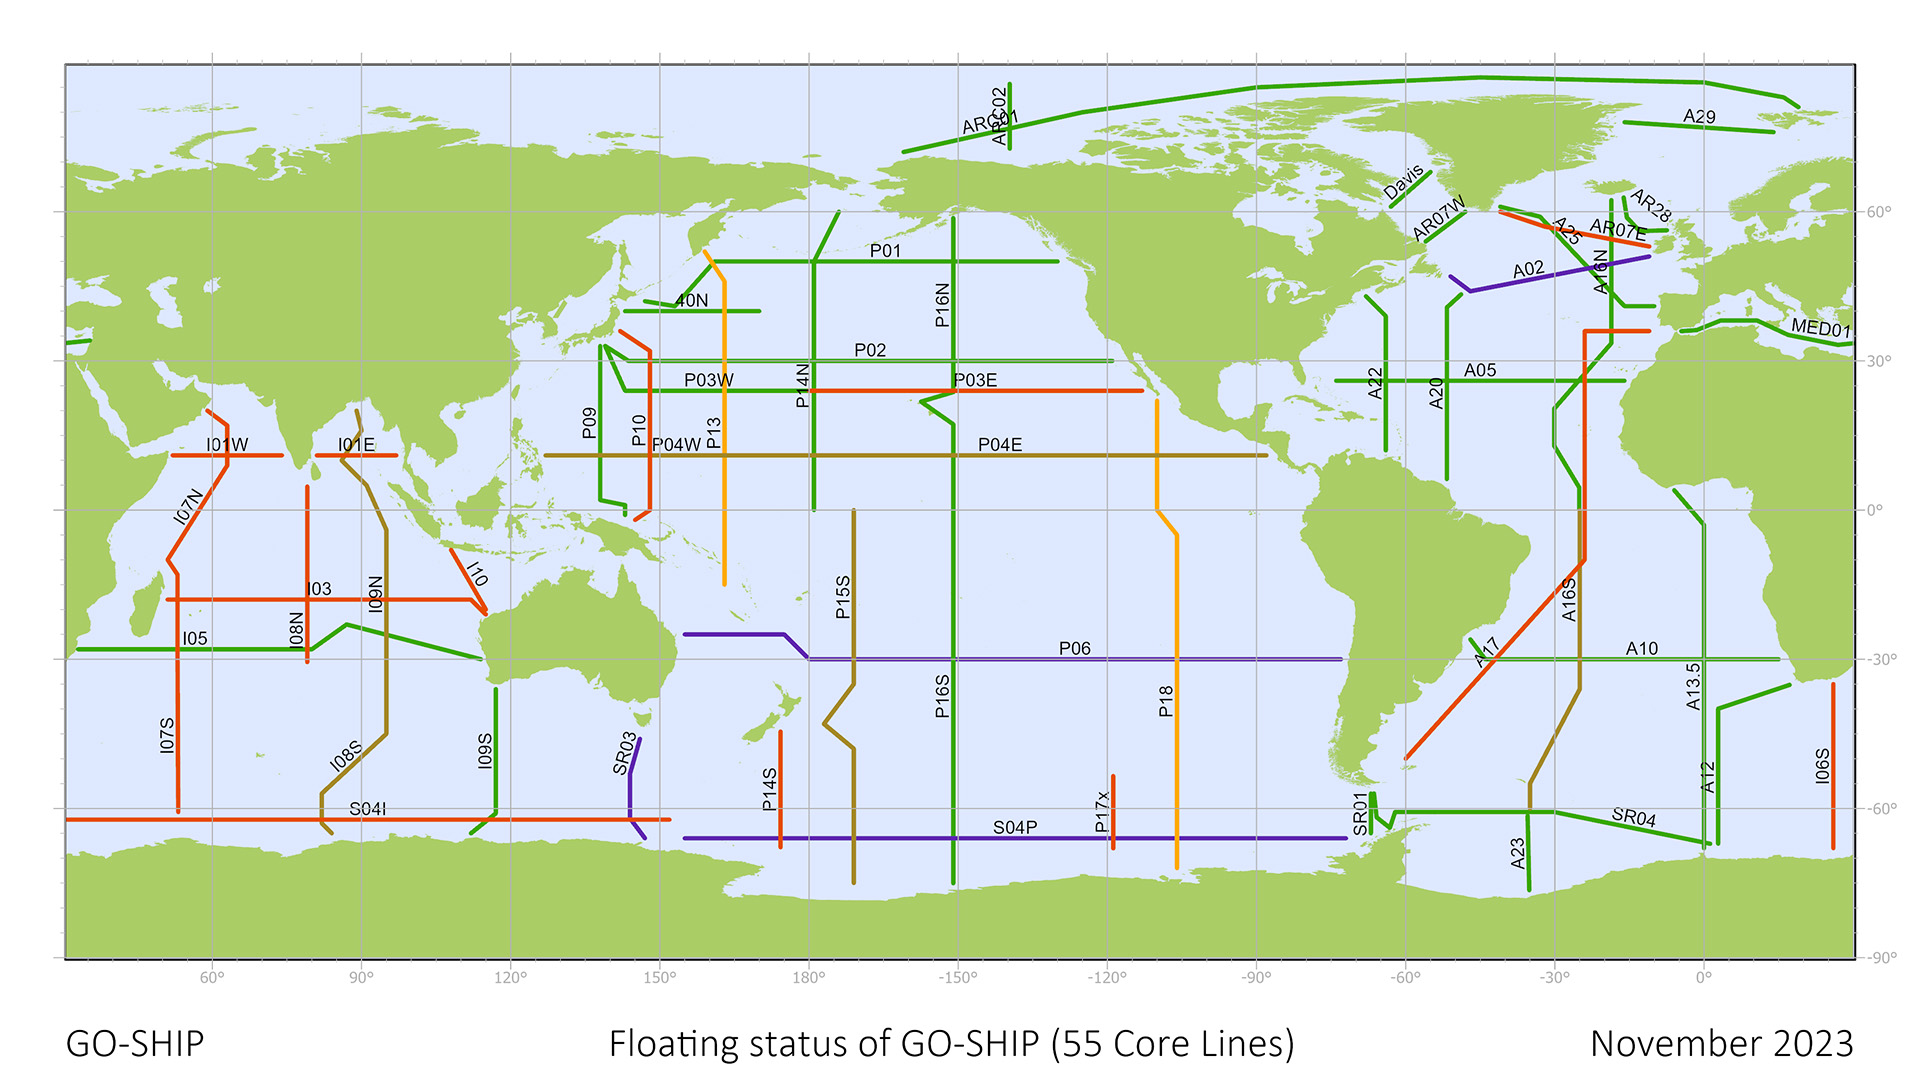 GO-SHIP Reference Sections are repeat hydrographic sections that are, in general, coast-to-coast or coast-to-ice.